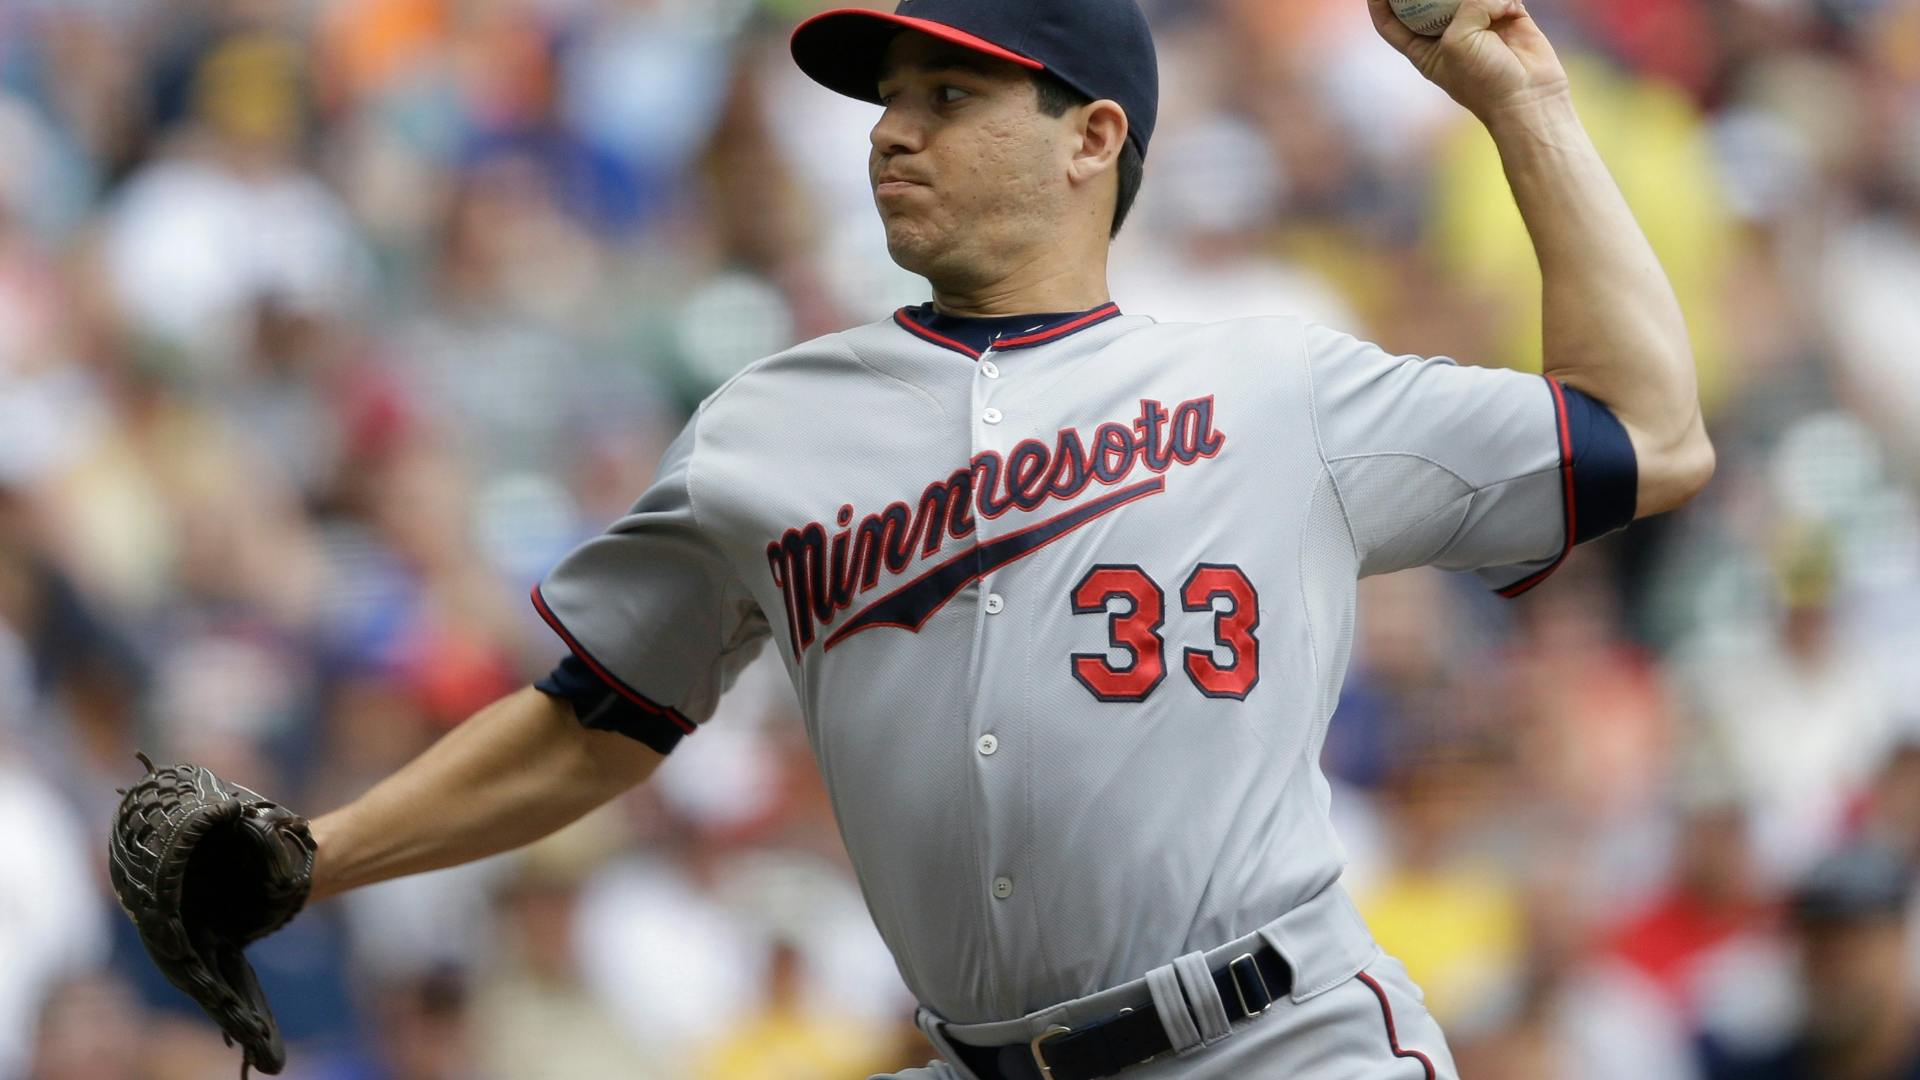 Twins lefthander Tommy Milone says Friday's one-run, six-inning performance was a continuation of "one of the best stretches of my career."